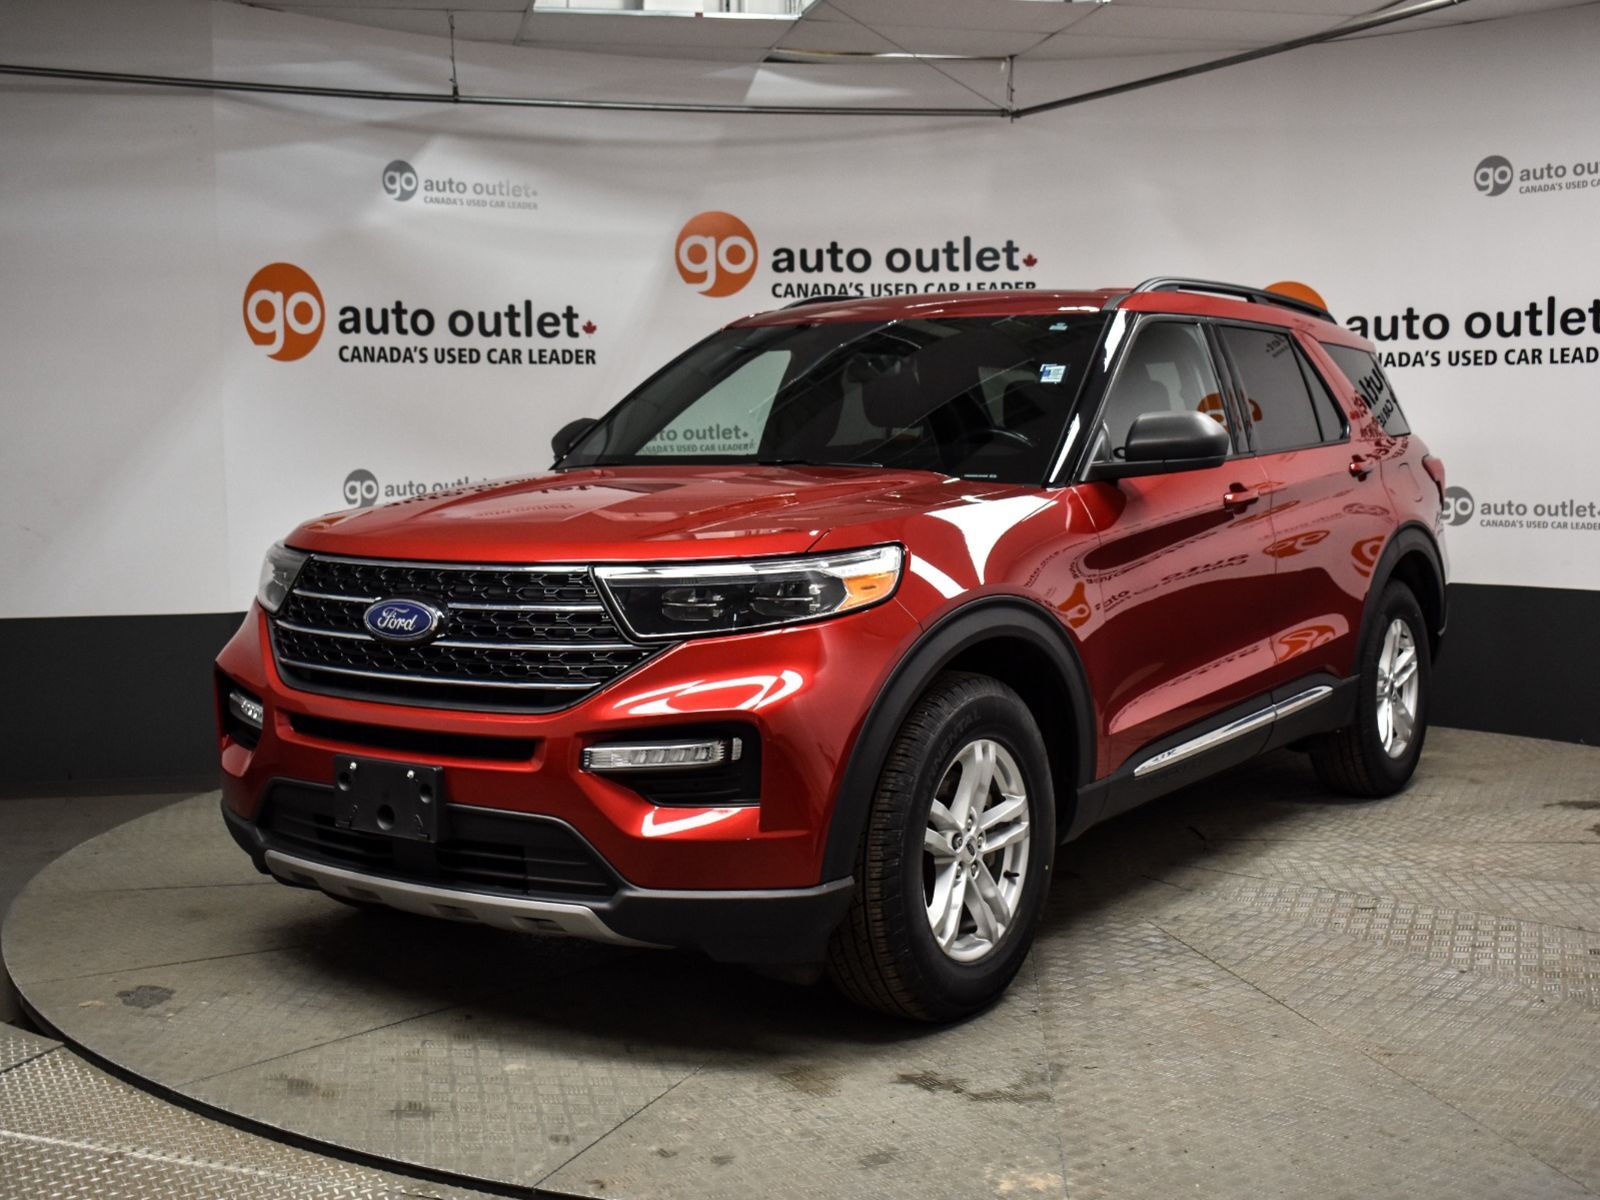 2020 Ford Explorer XLT Navi Heated Leather Seats